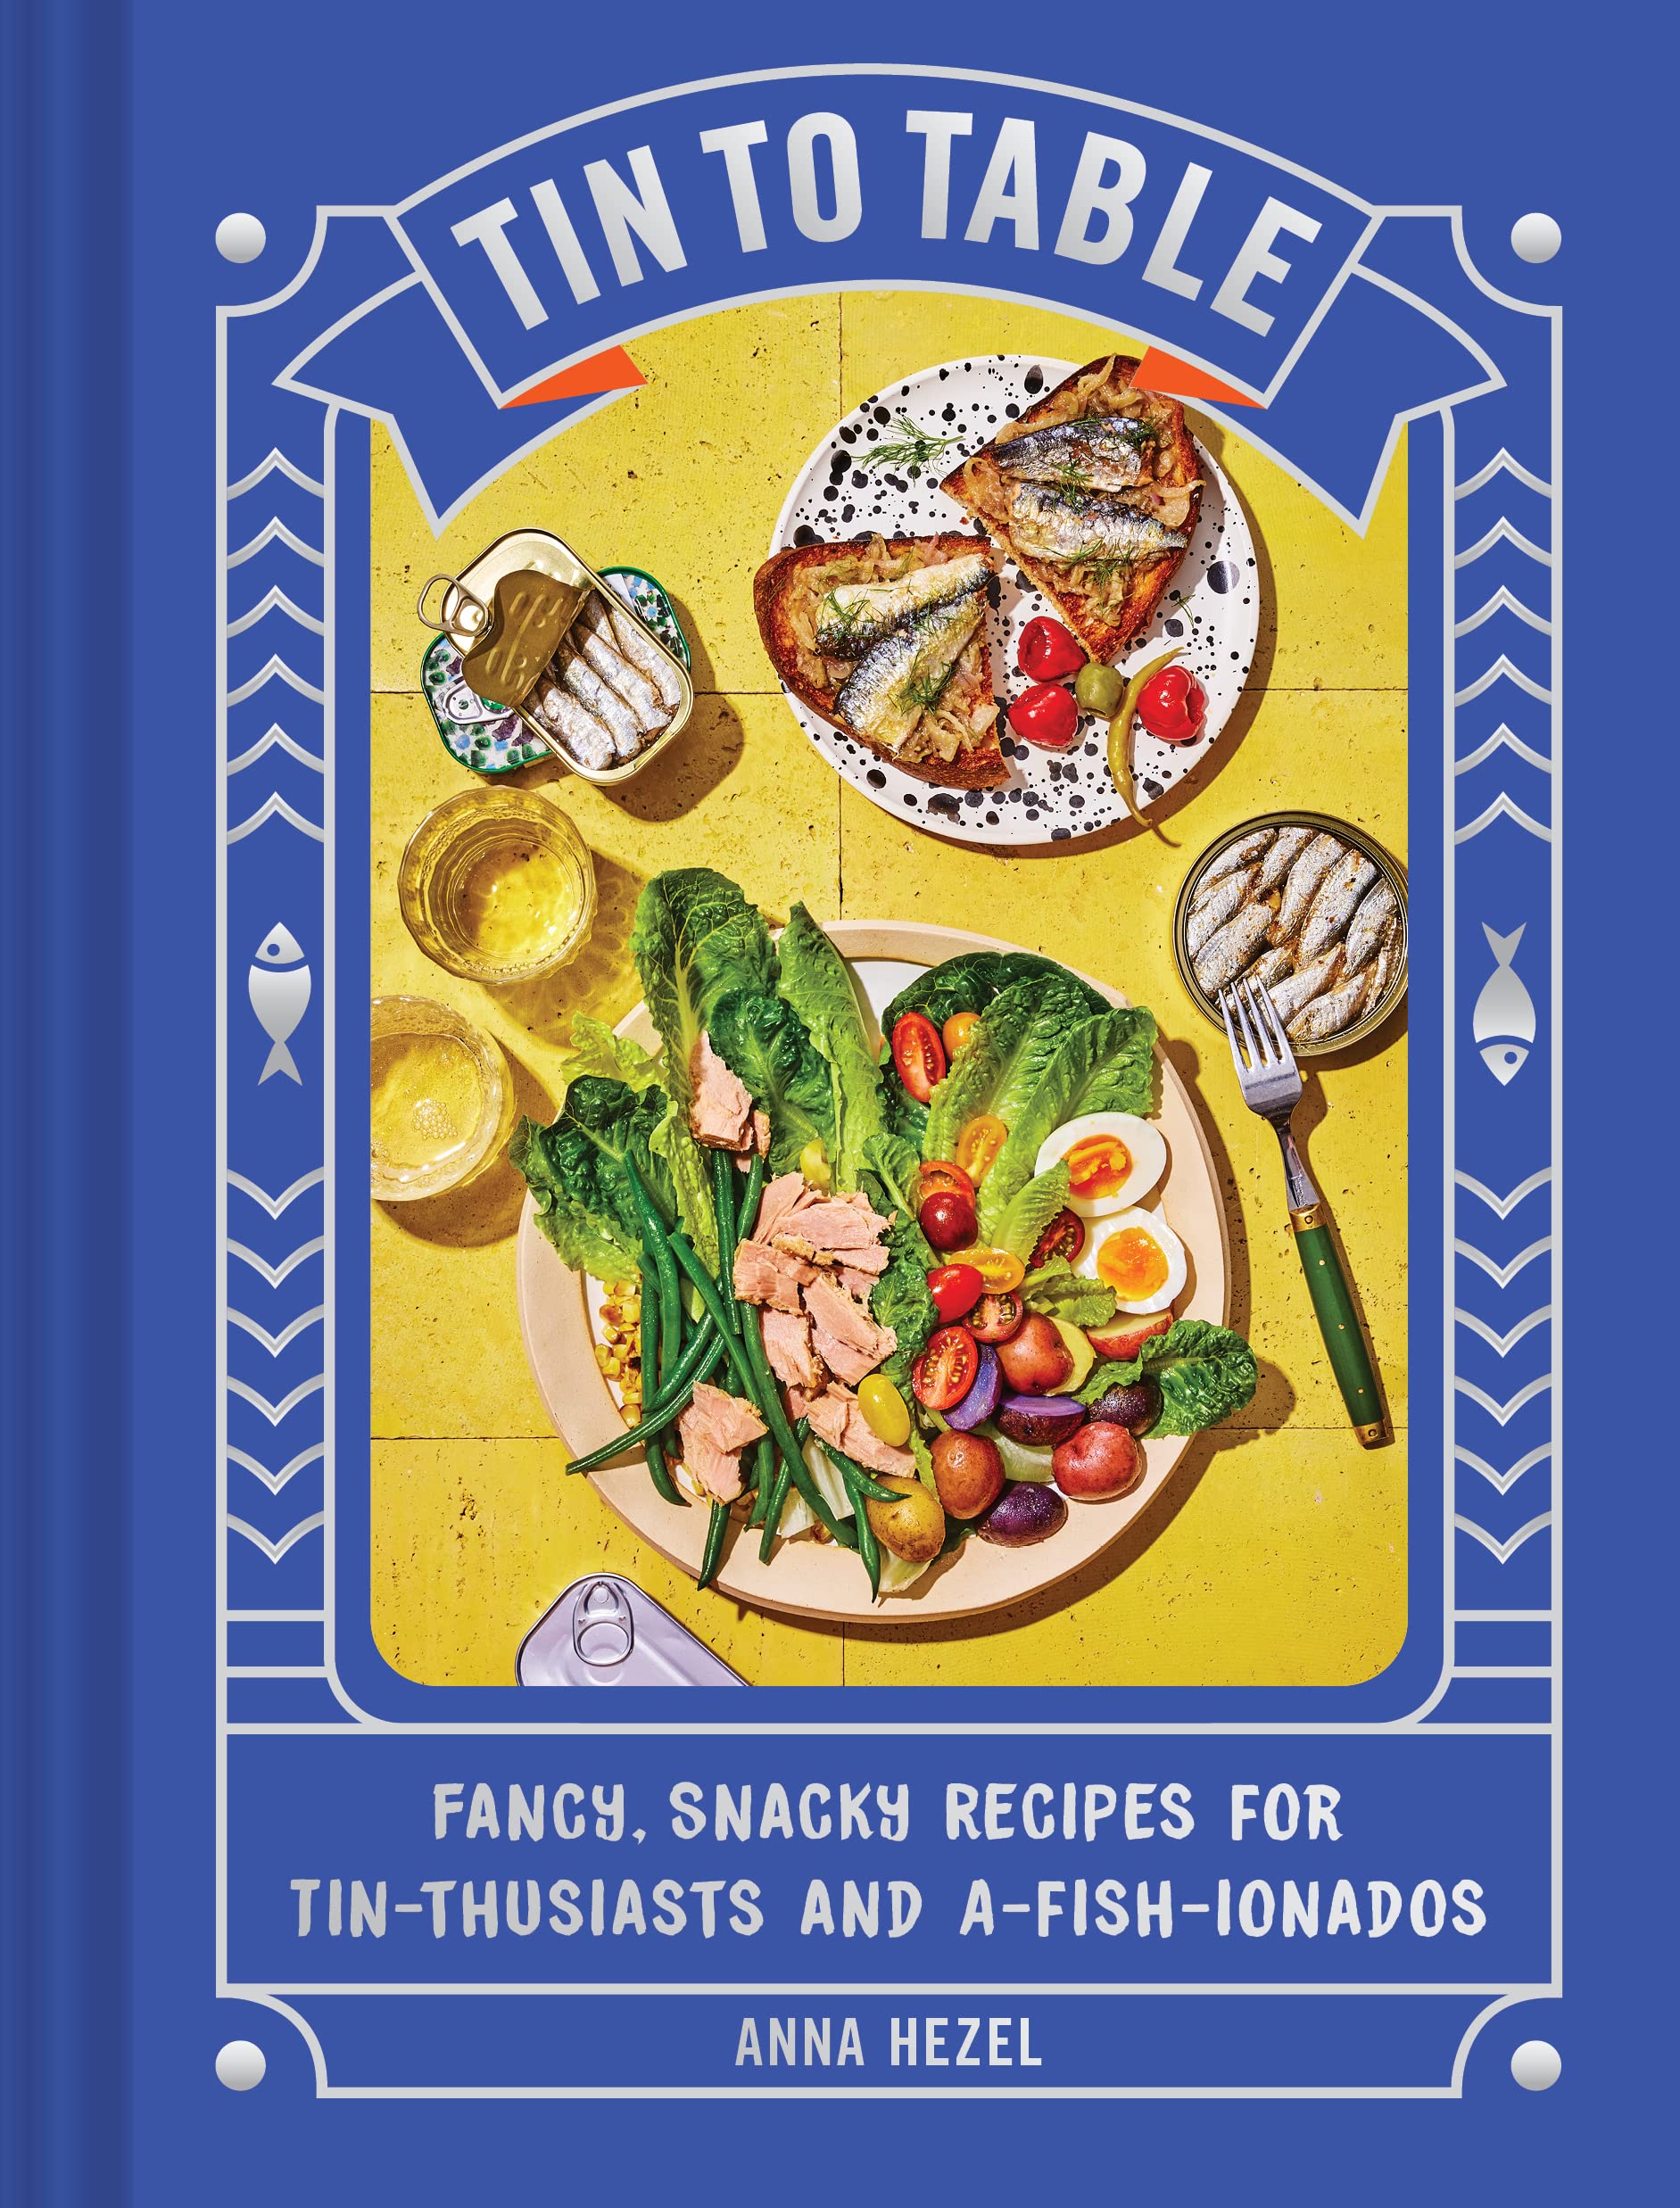 Tin to Table: Fancy, Snacky Recipes for Tin-thusiasts and A-fish-ionados (Anna Hezel)